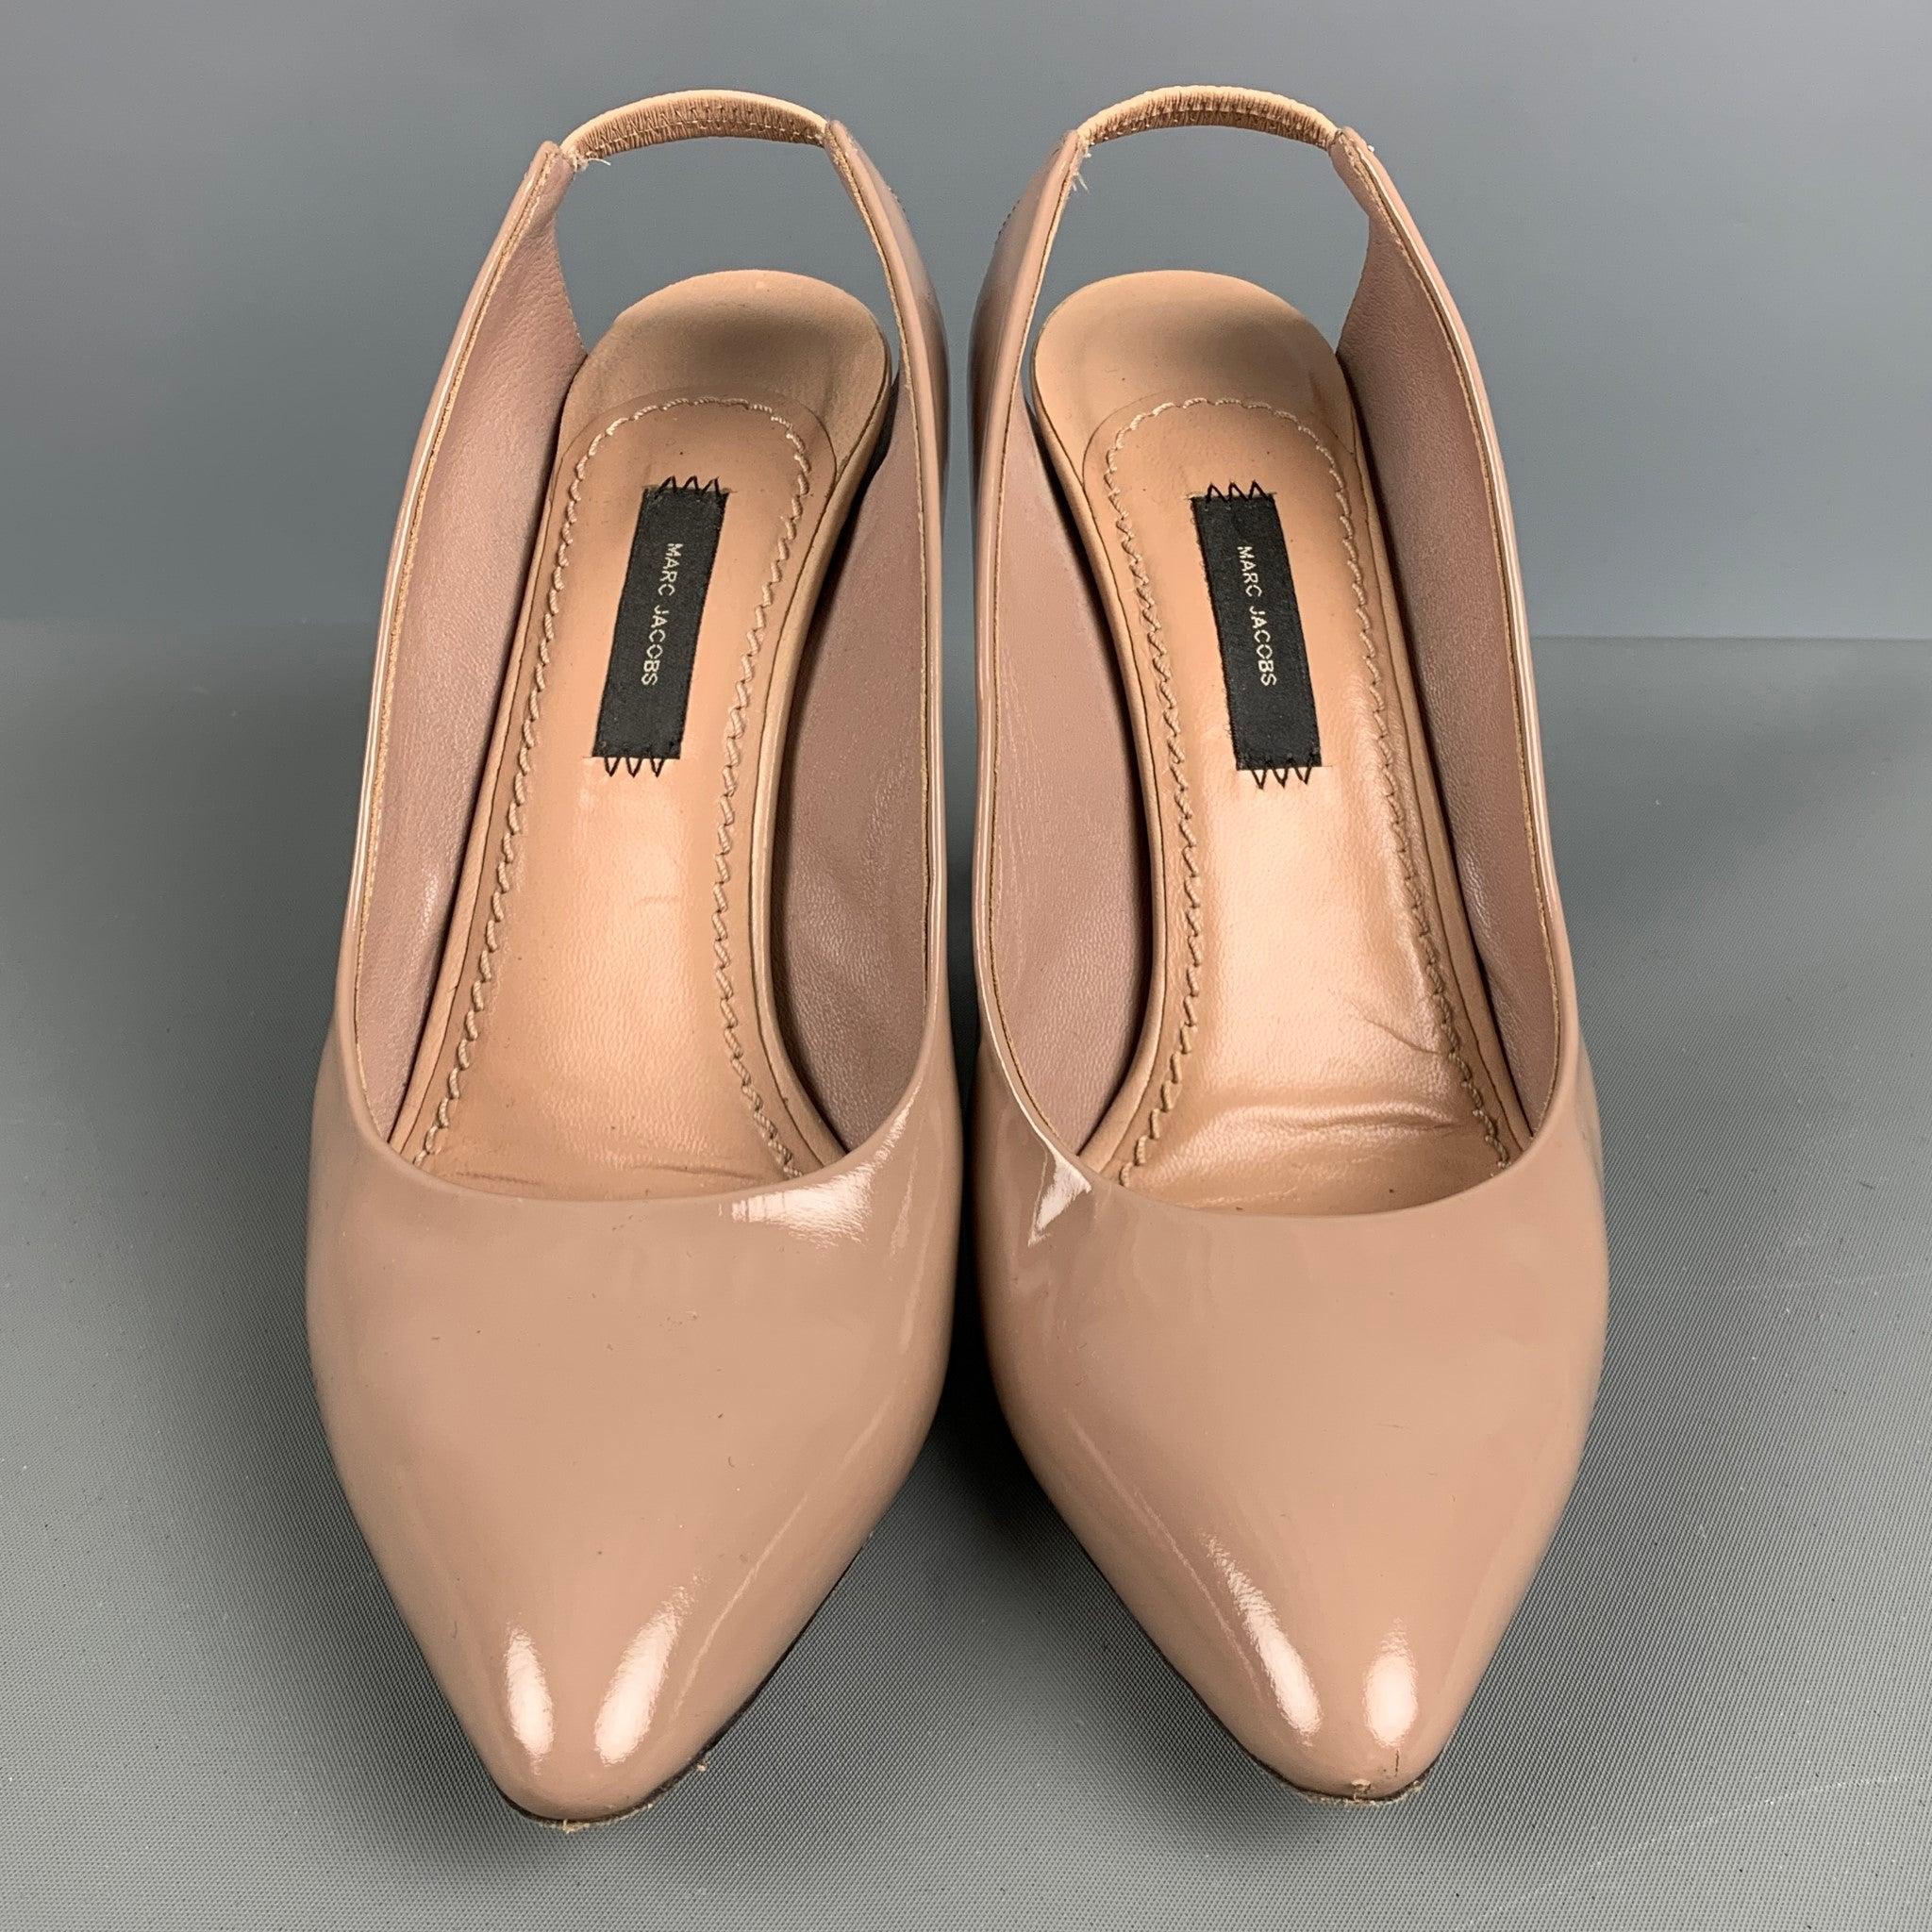 MARC JACOBS Size 8 Taupe Patent Leather Slingback Pumps In Good Condition For Sale In San Francisco, CA